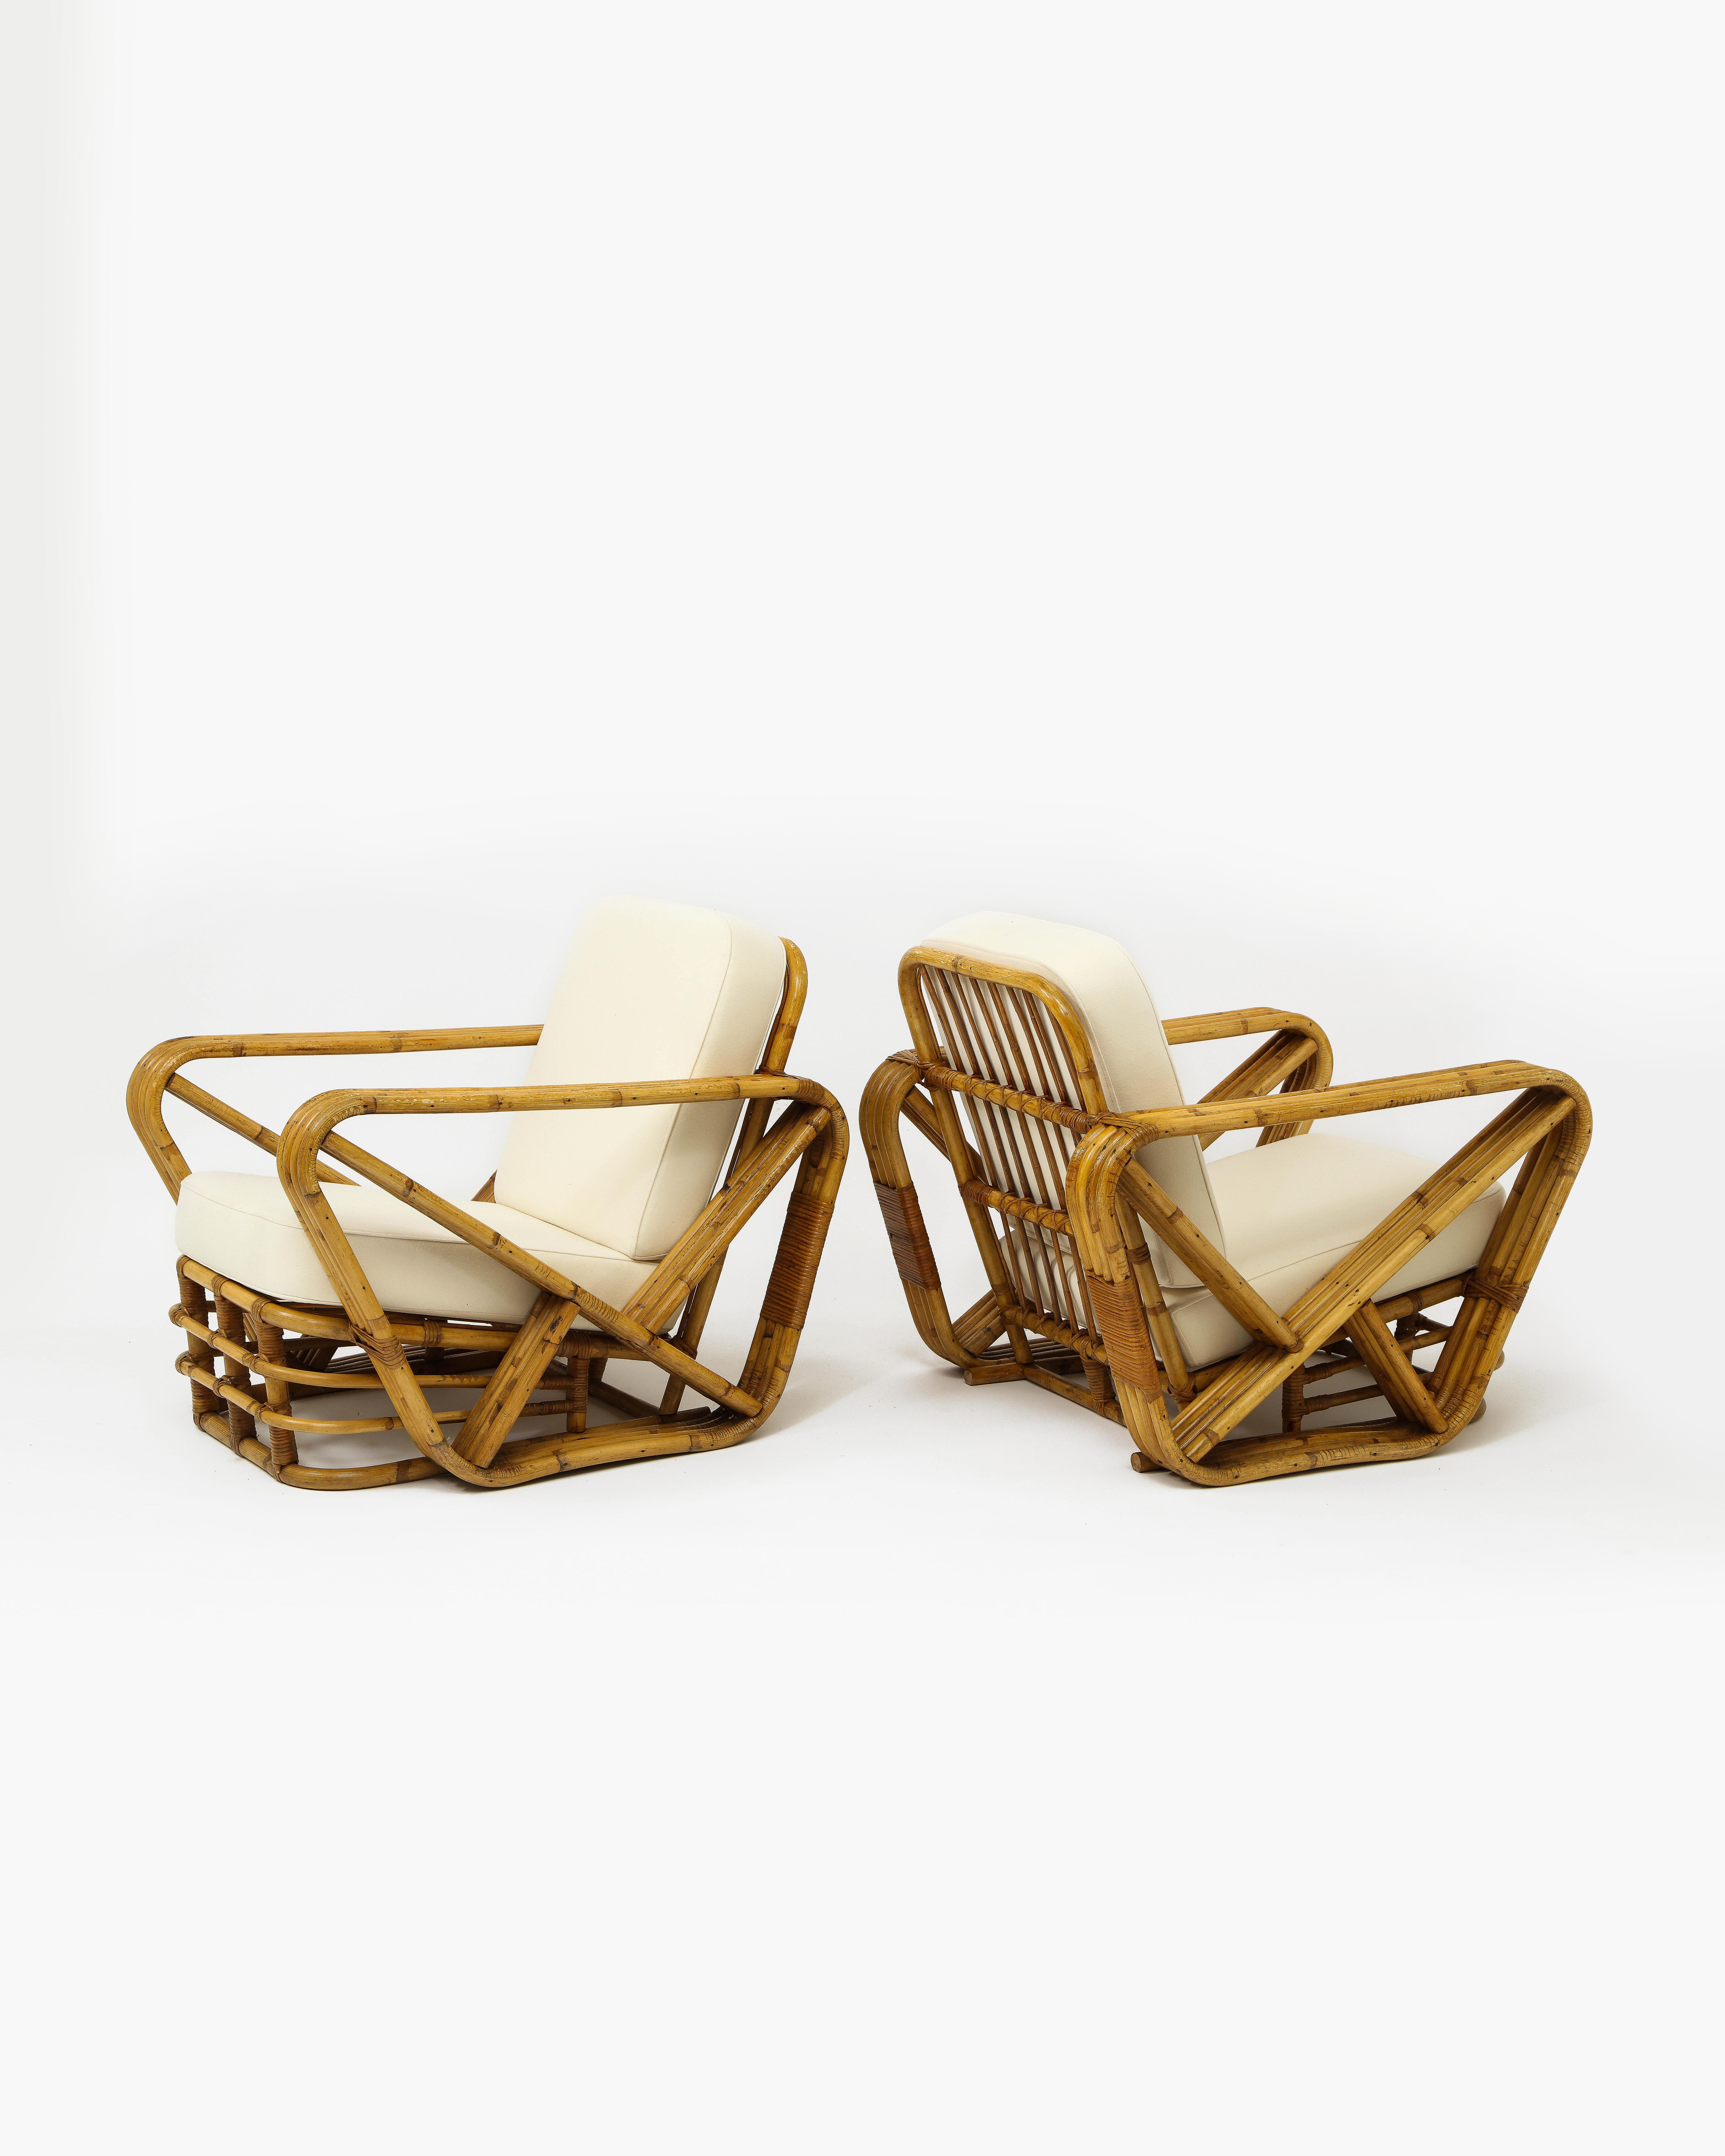 French Pair of Paul Frankl Style Rattan Lounge Chairs, France, 1950s